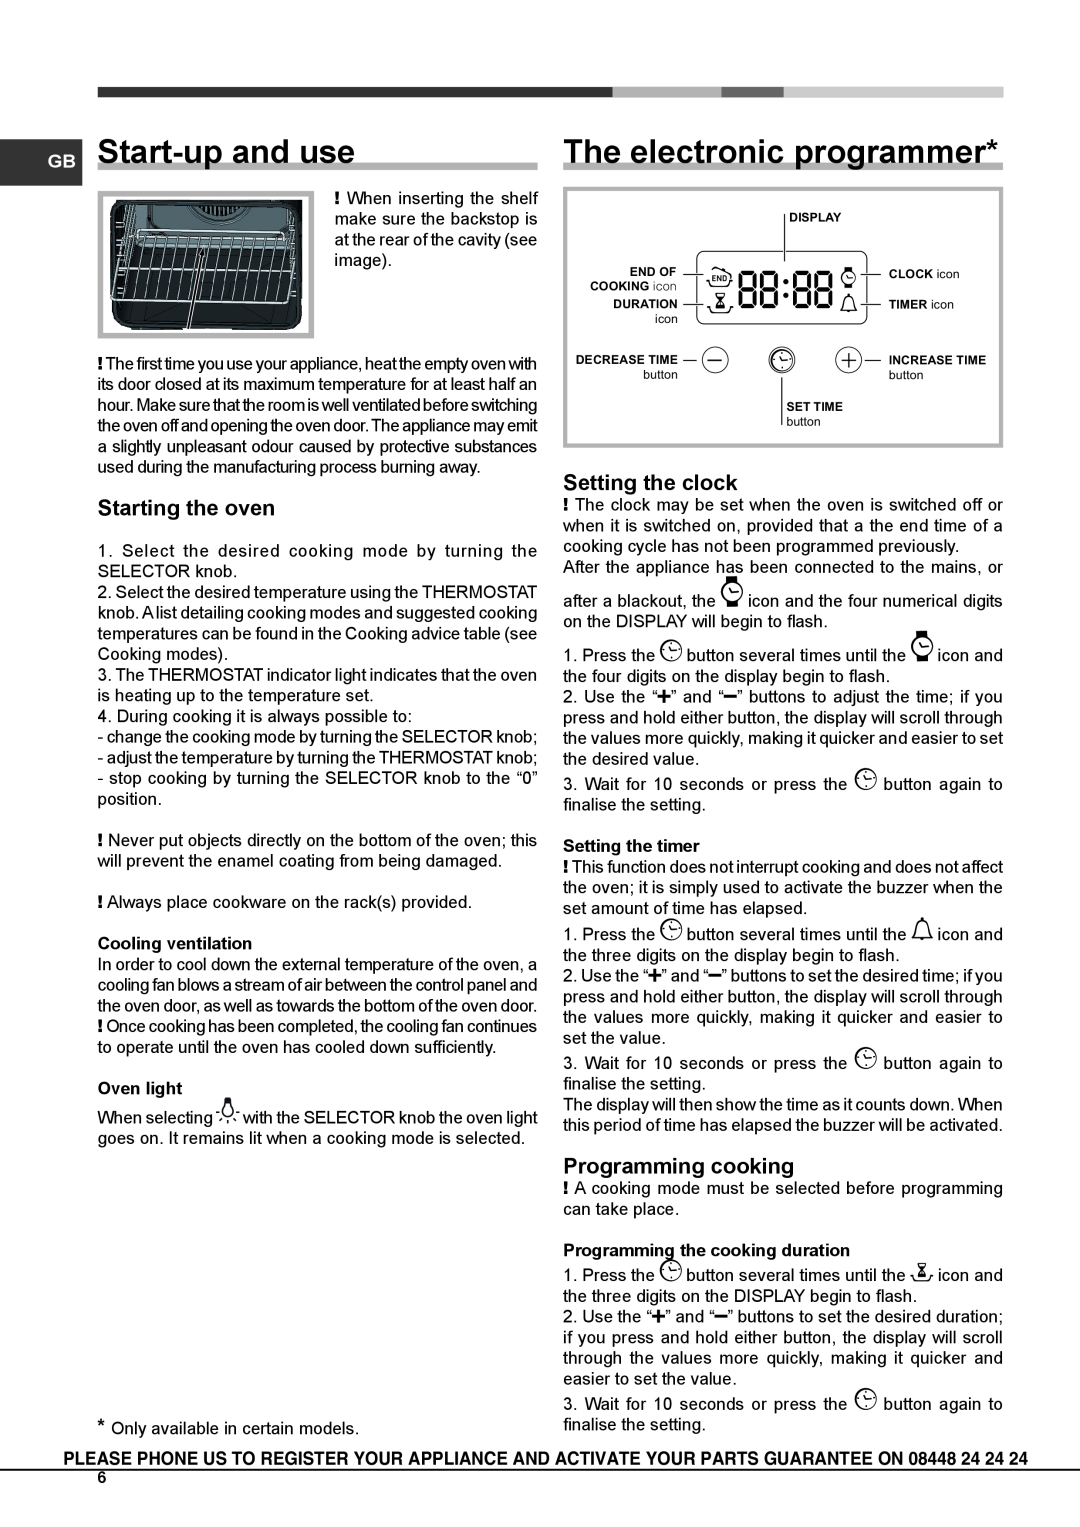 Hotpoint SCL 08 EB GB Start-up and use, The electronic programmer, Starting the oven, Setting the clock, Oven light 